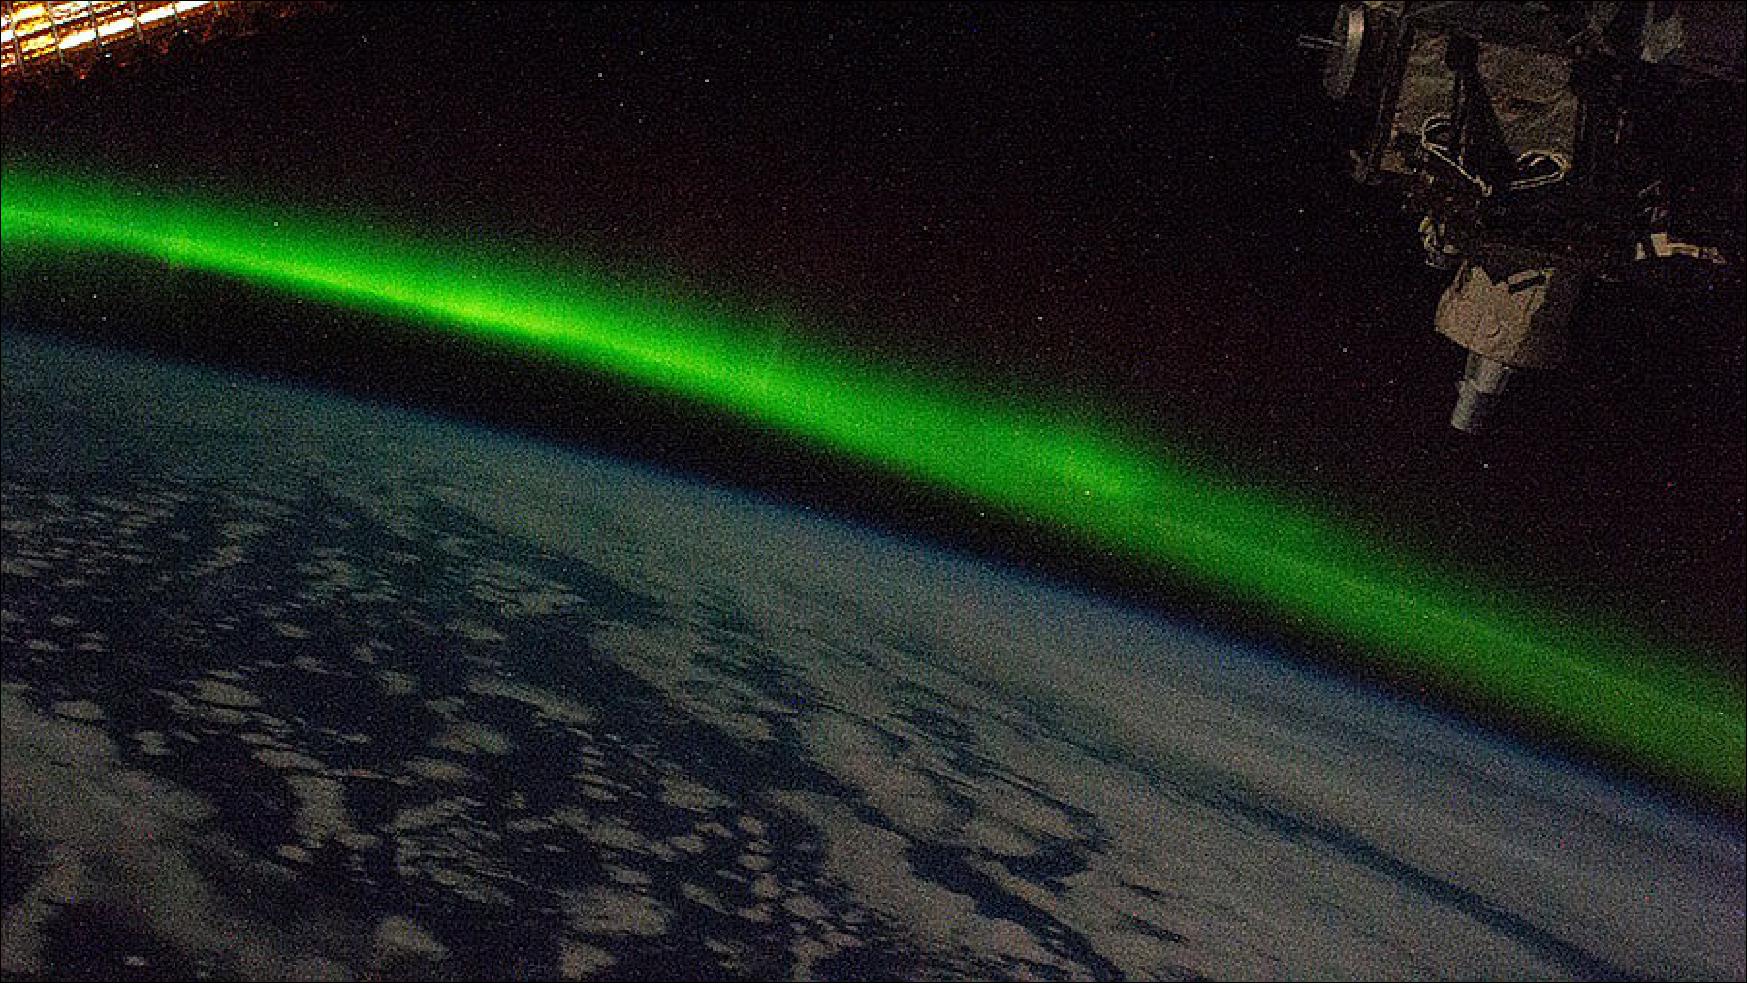 Figure 18: The aurora australis streams above the Indian Ocean in this picture from the space station as it orbited 270 miles above the Earth (image credit: NASA)